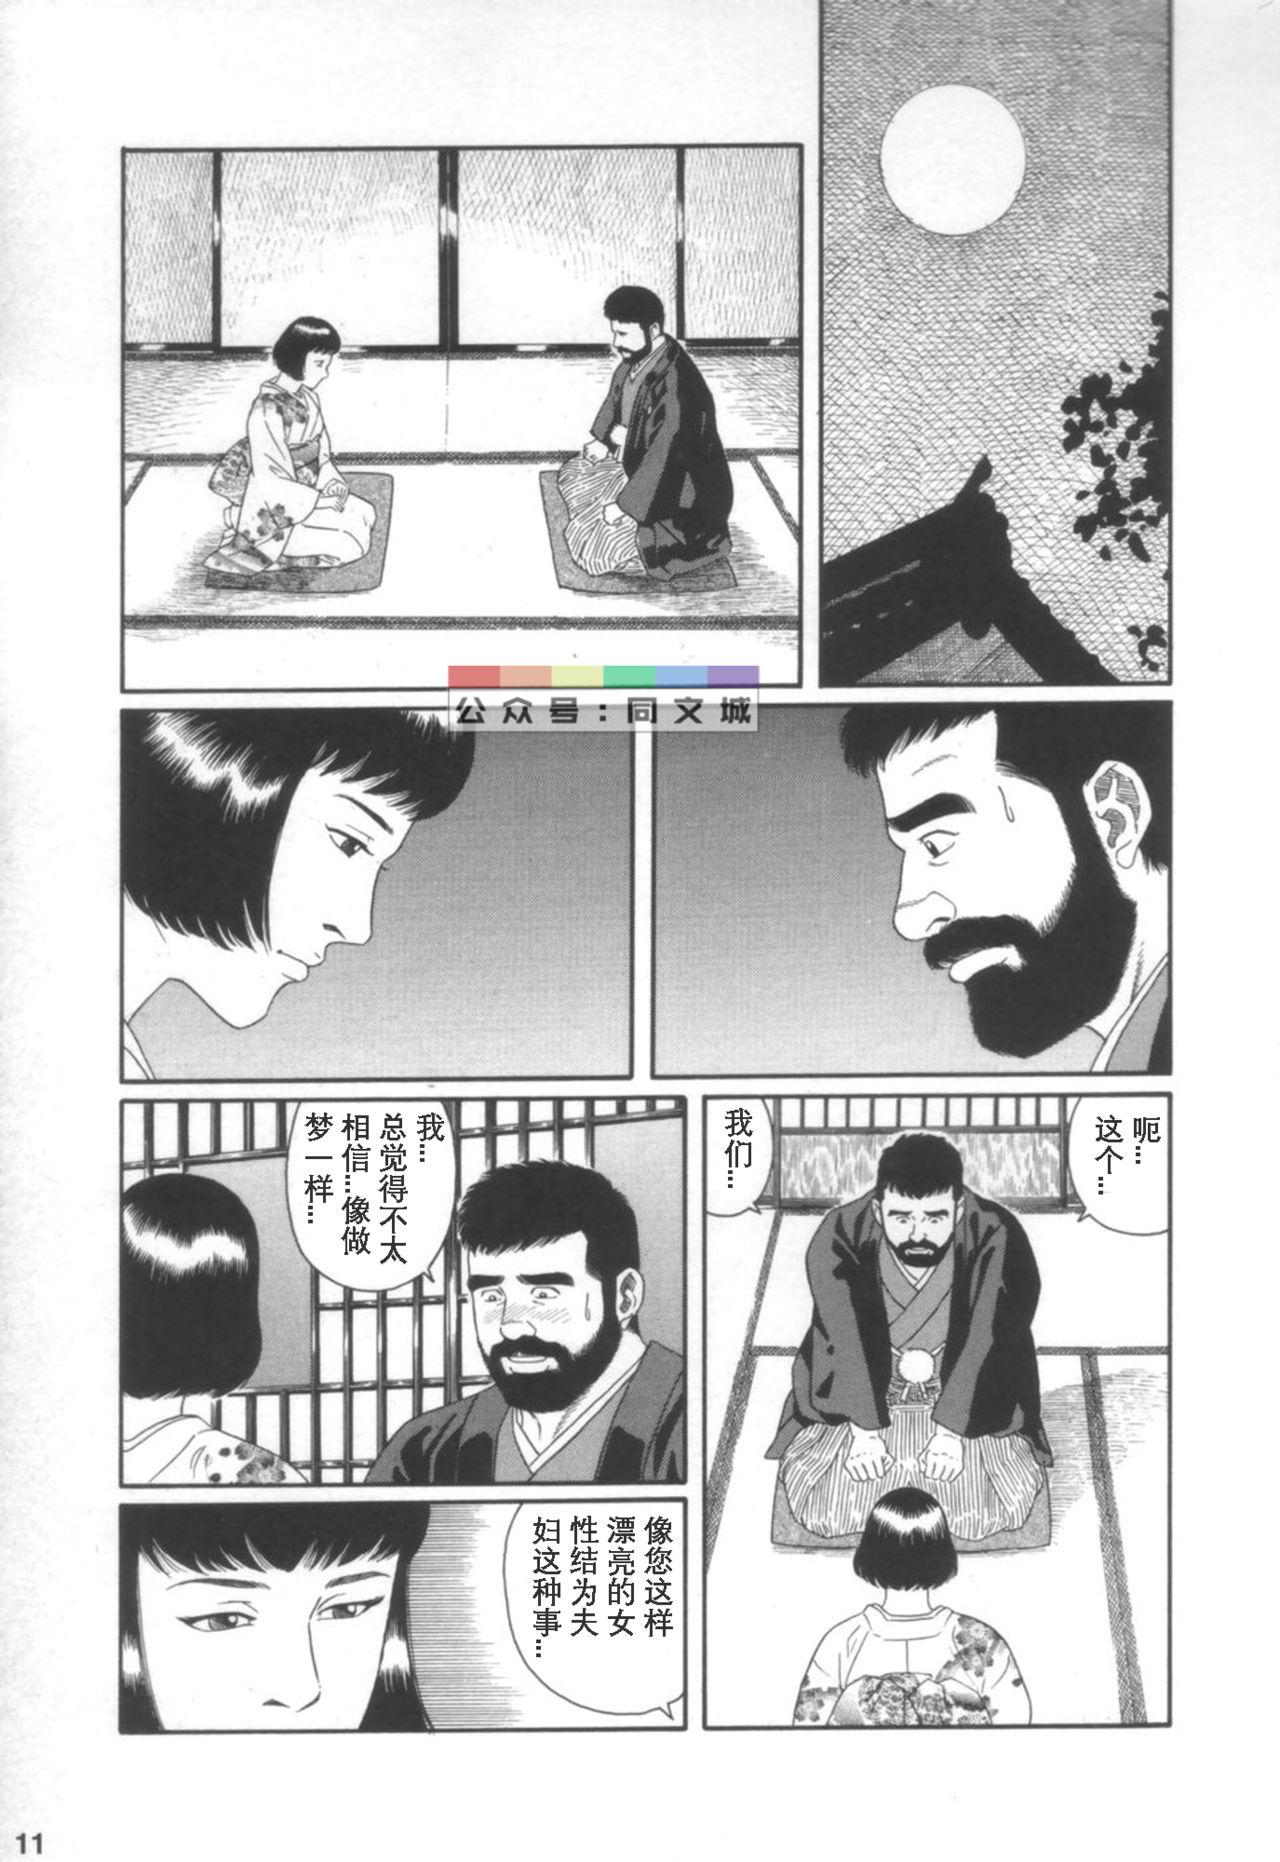 Chacal Gedou no Ie Joukan Black Hair - Page 10